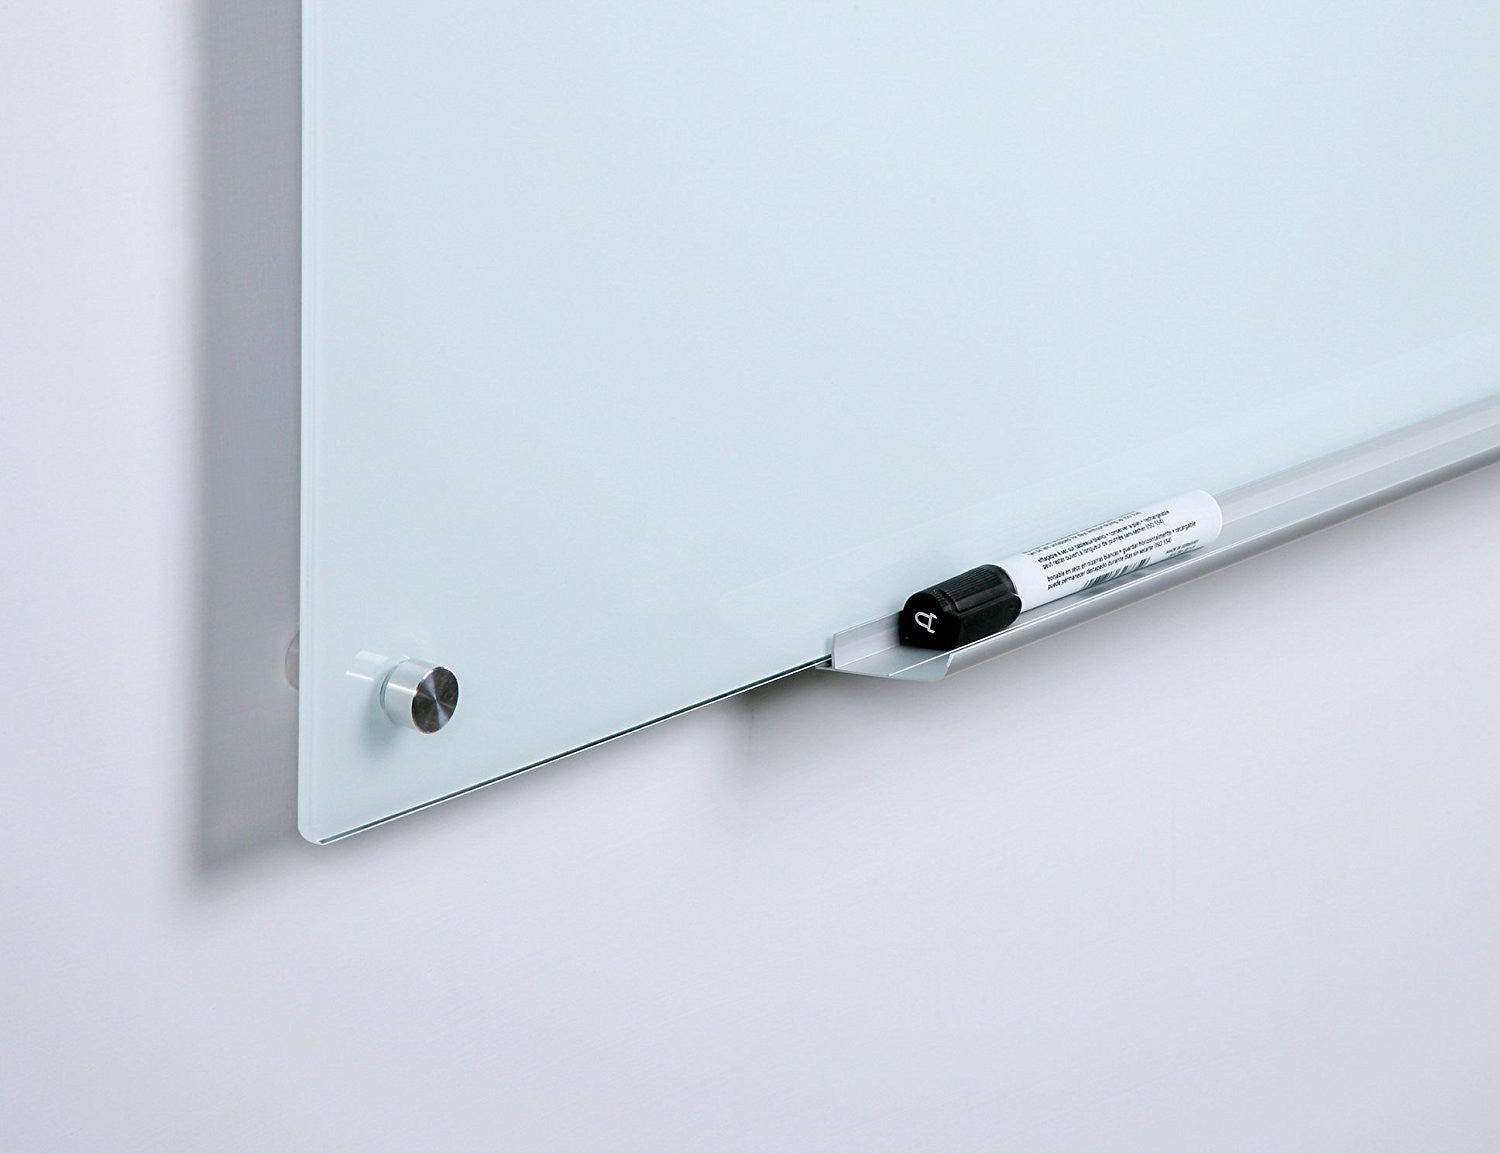 Magnetic White Glass Dry-Erase Board Set - Includes Board, Magnets, and Marker Tray. Showing frameless design and rounded corners. 